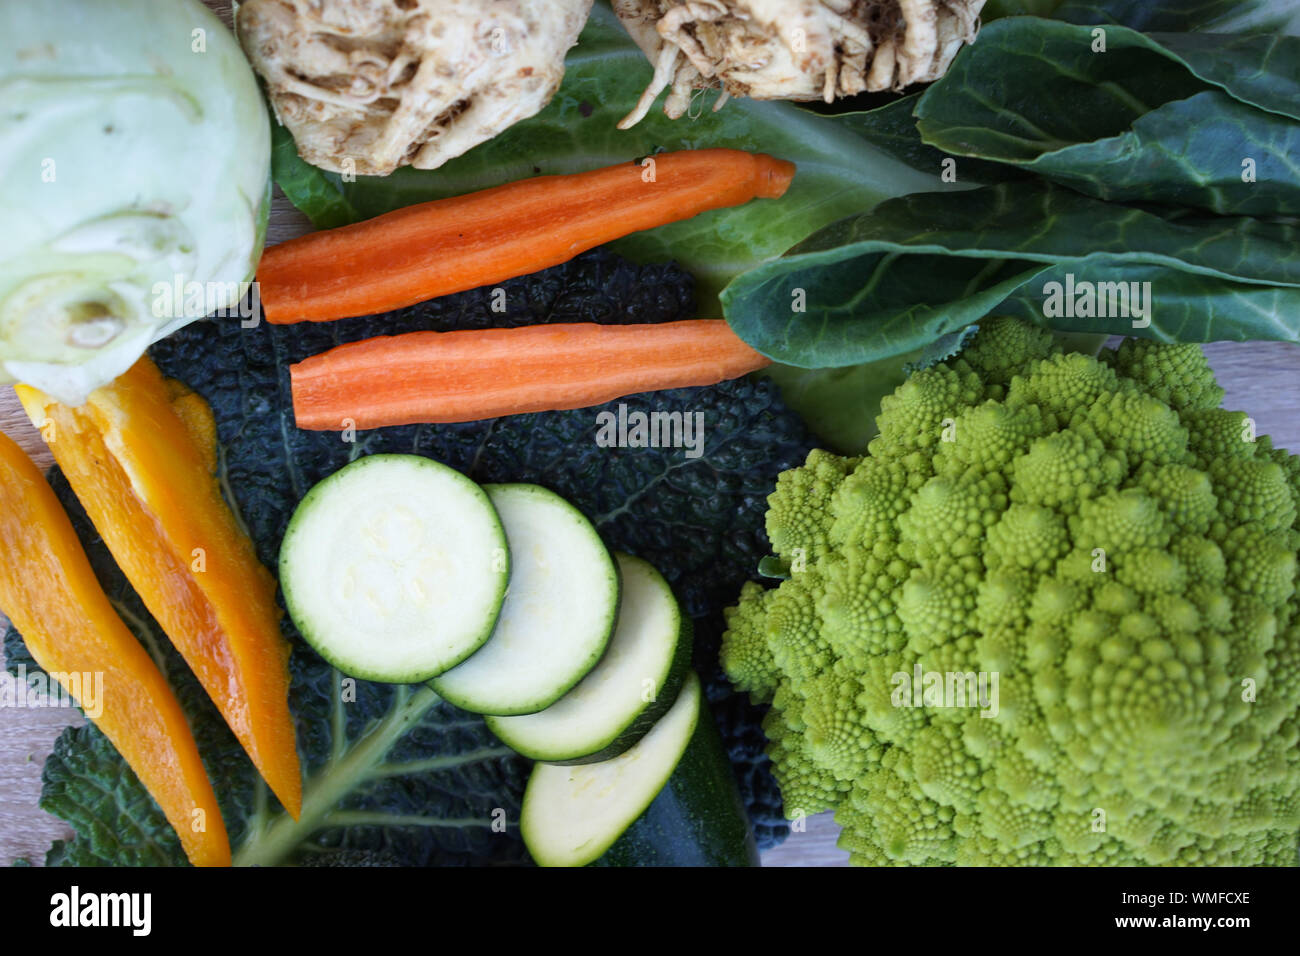 Directly Above View Of Fresh Vegetables Stock Photo